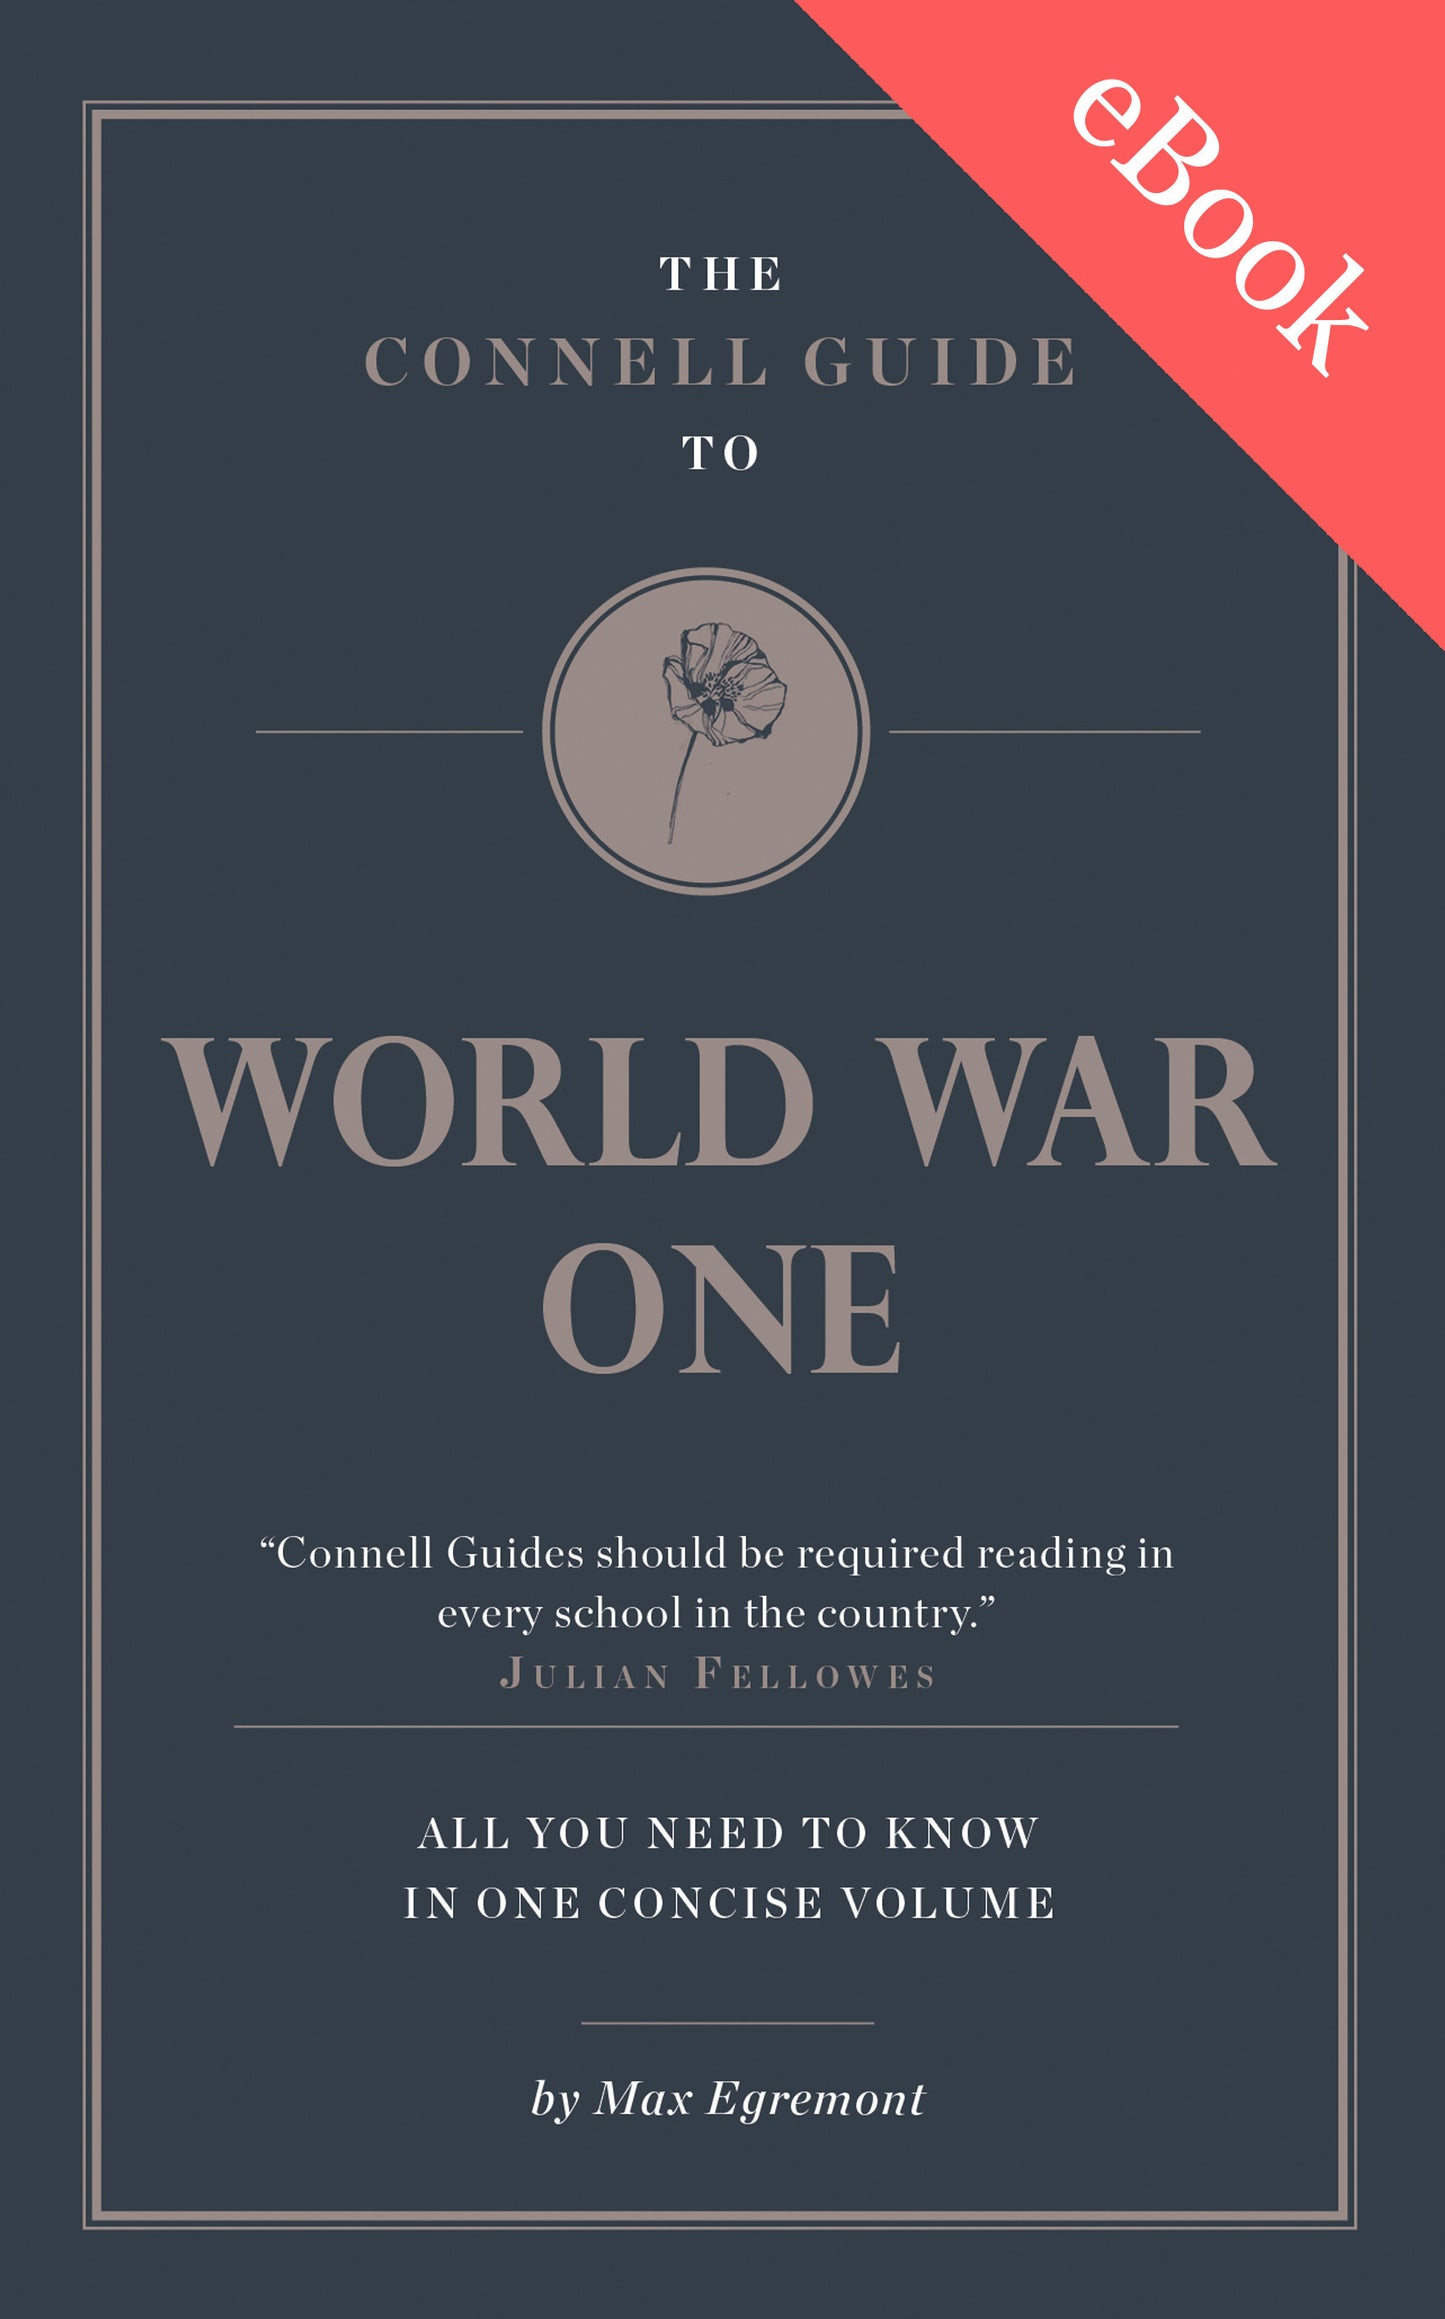 The Connell Guide to World War One